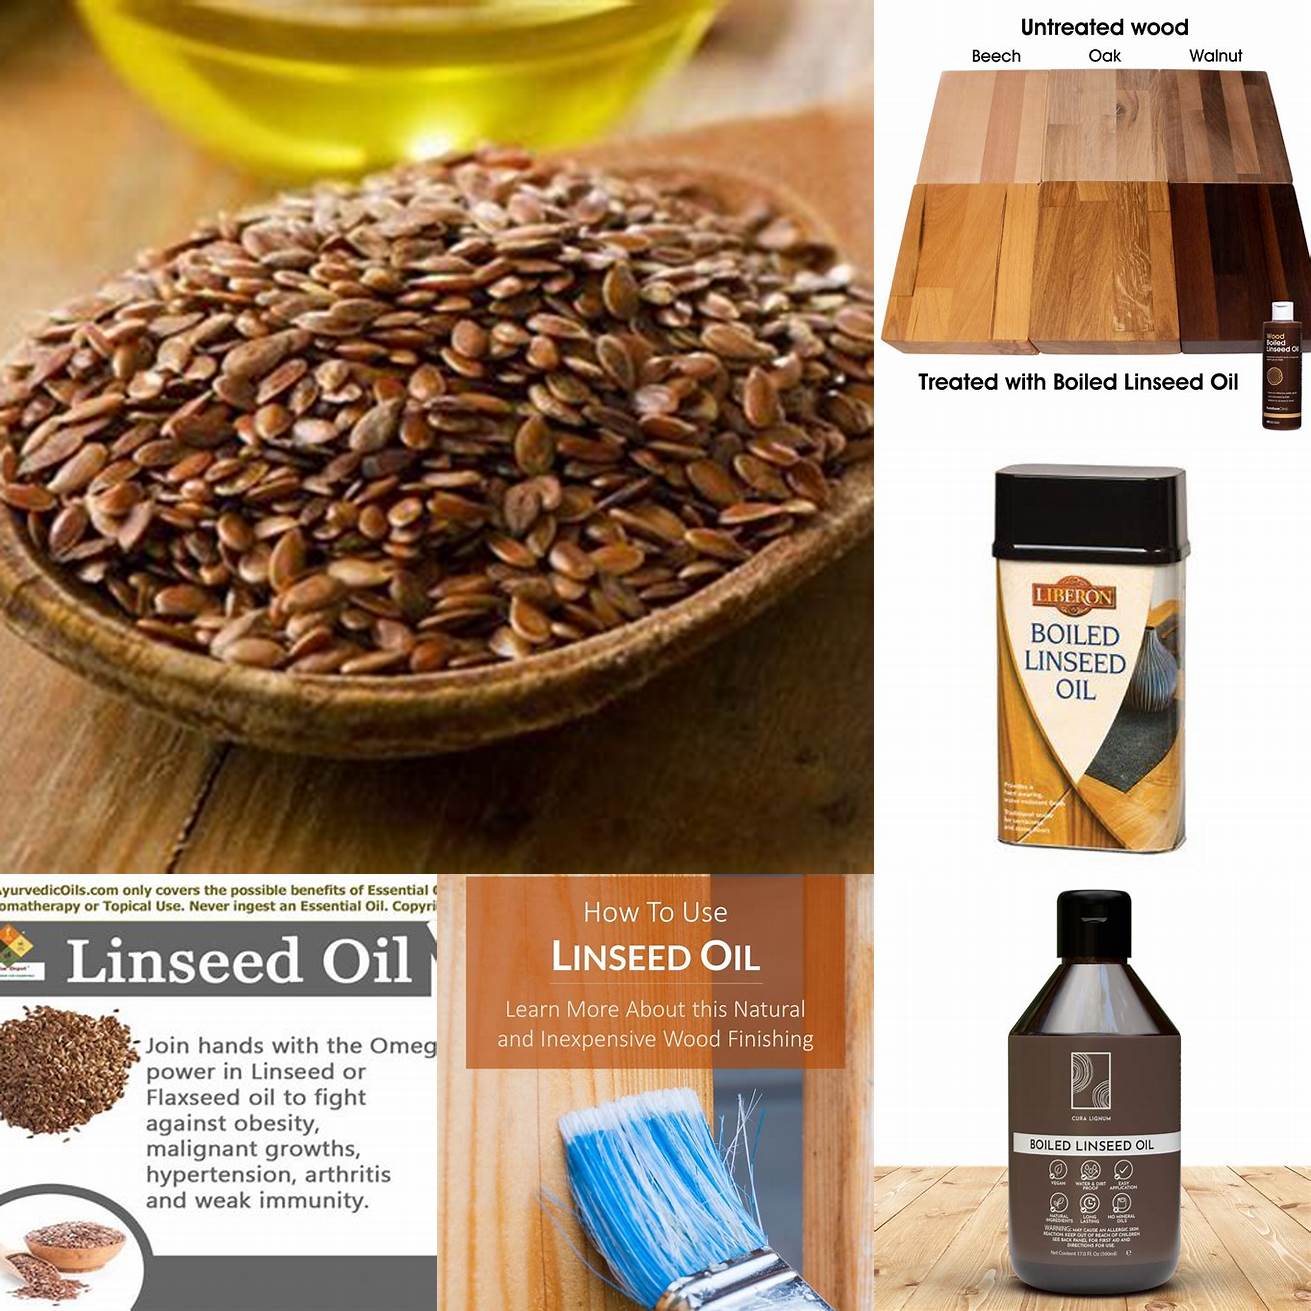 Linseed Oil Benefits